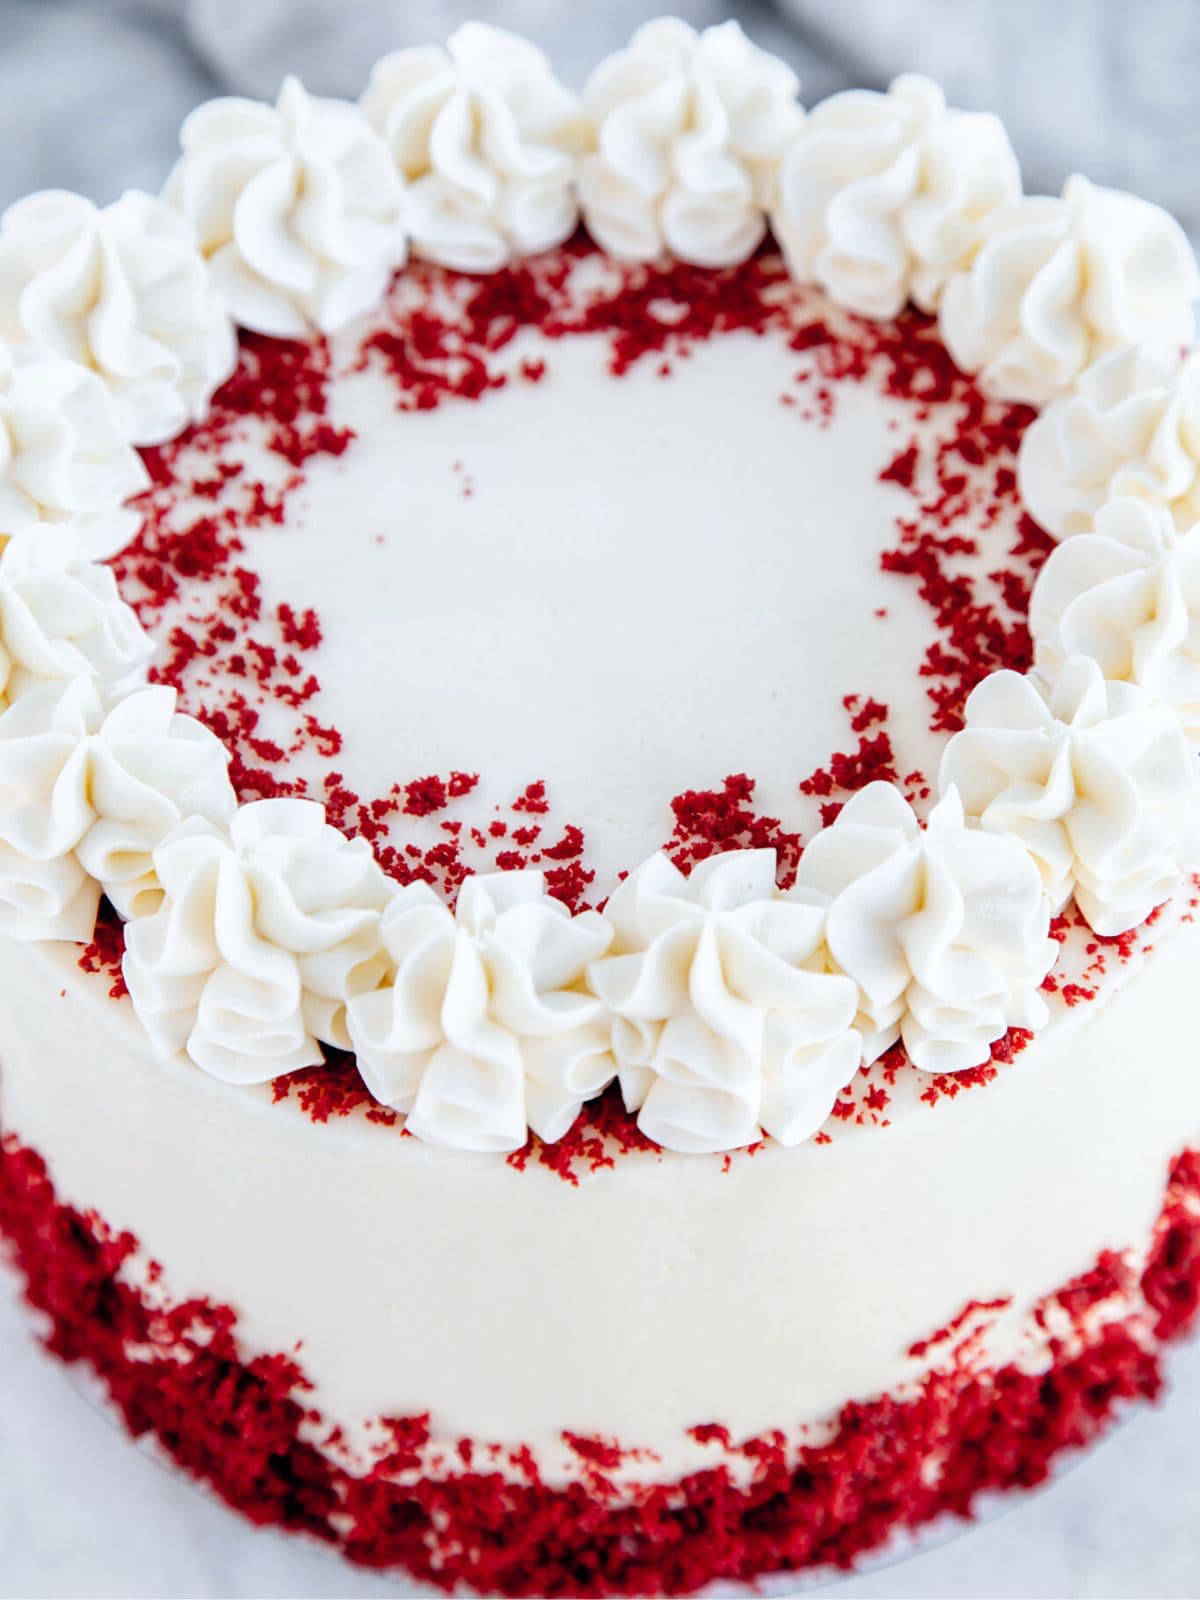 Easy Red Velvet Crumb Cake Recipe from a Cake Mix - Ever After in the Woods